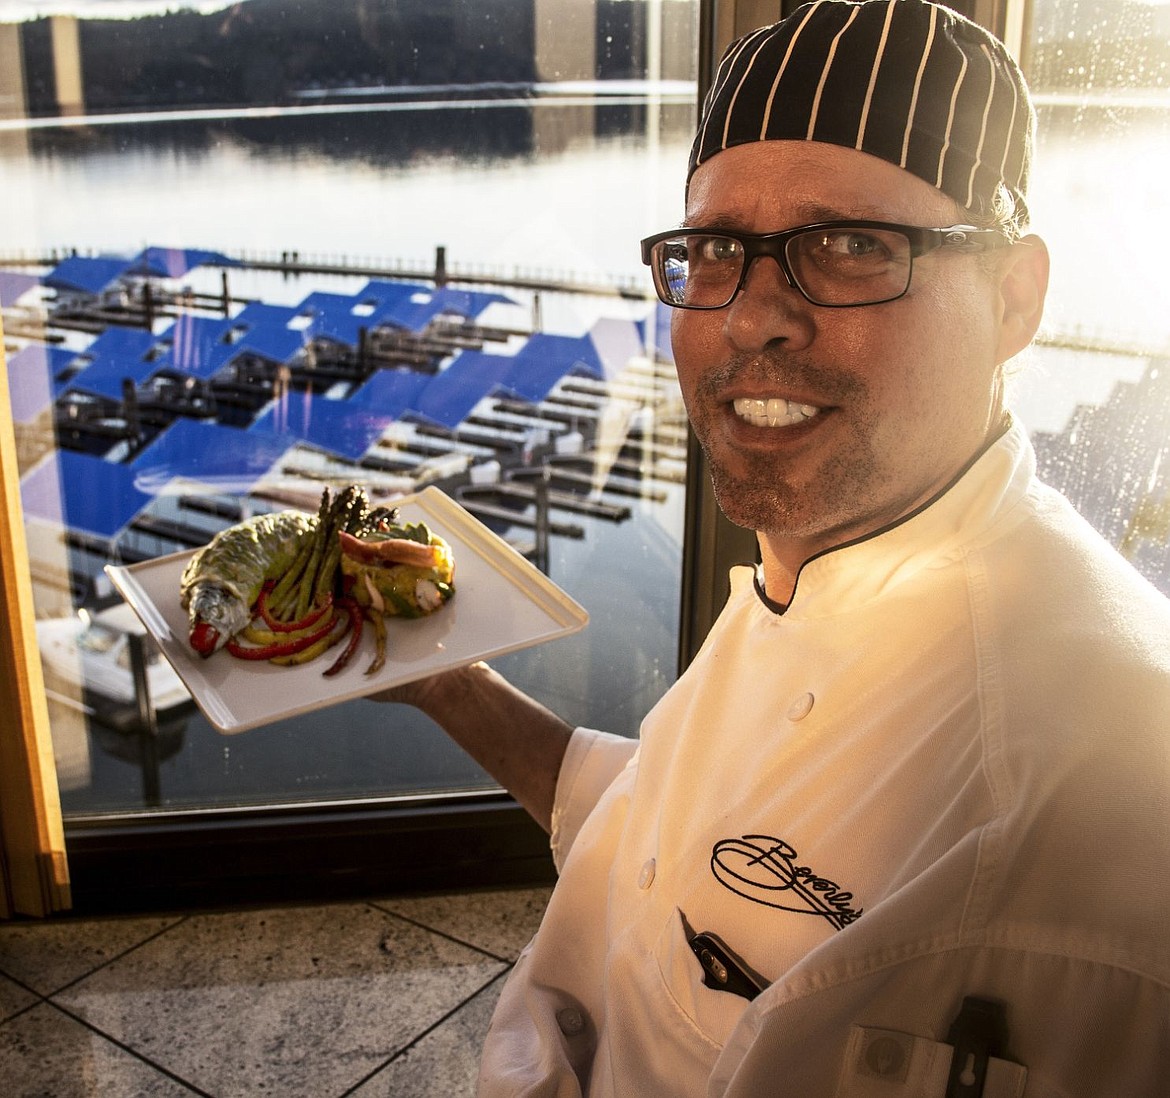 &lt;p&gt;Beverly's Chef Mark Bertram finished in the top three of the Chef's Roll Avocado Madness cooking competition this week. The competition started with 300 chefs from all over the world.&lt;/p&gt;